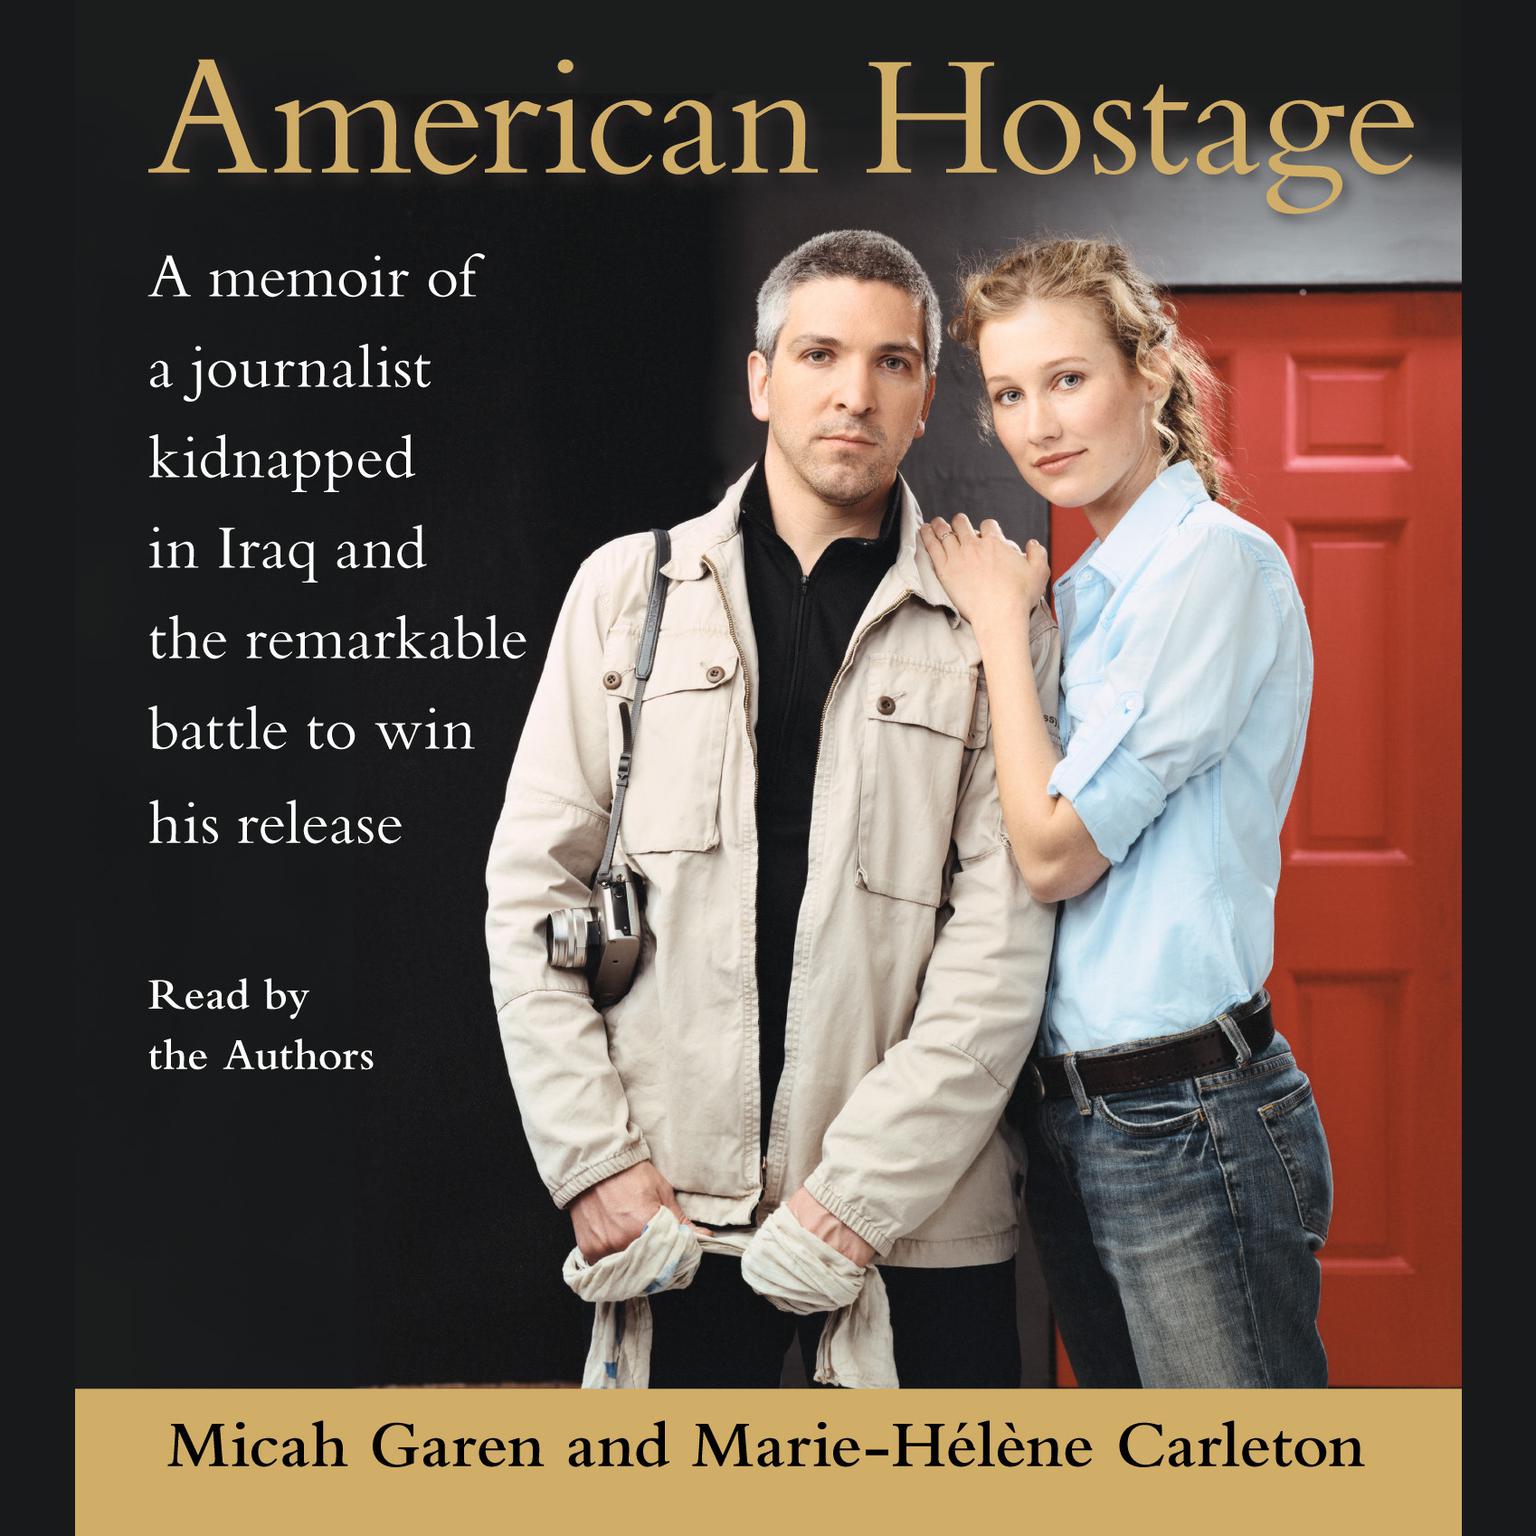 American Hostage (Abridged): A Memoir of a Journalist Kidnapped in Iraq and the Remarkable Battle to Win His Release Audiobook, by Micah Garen